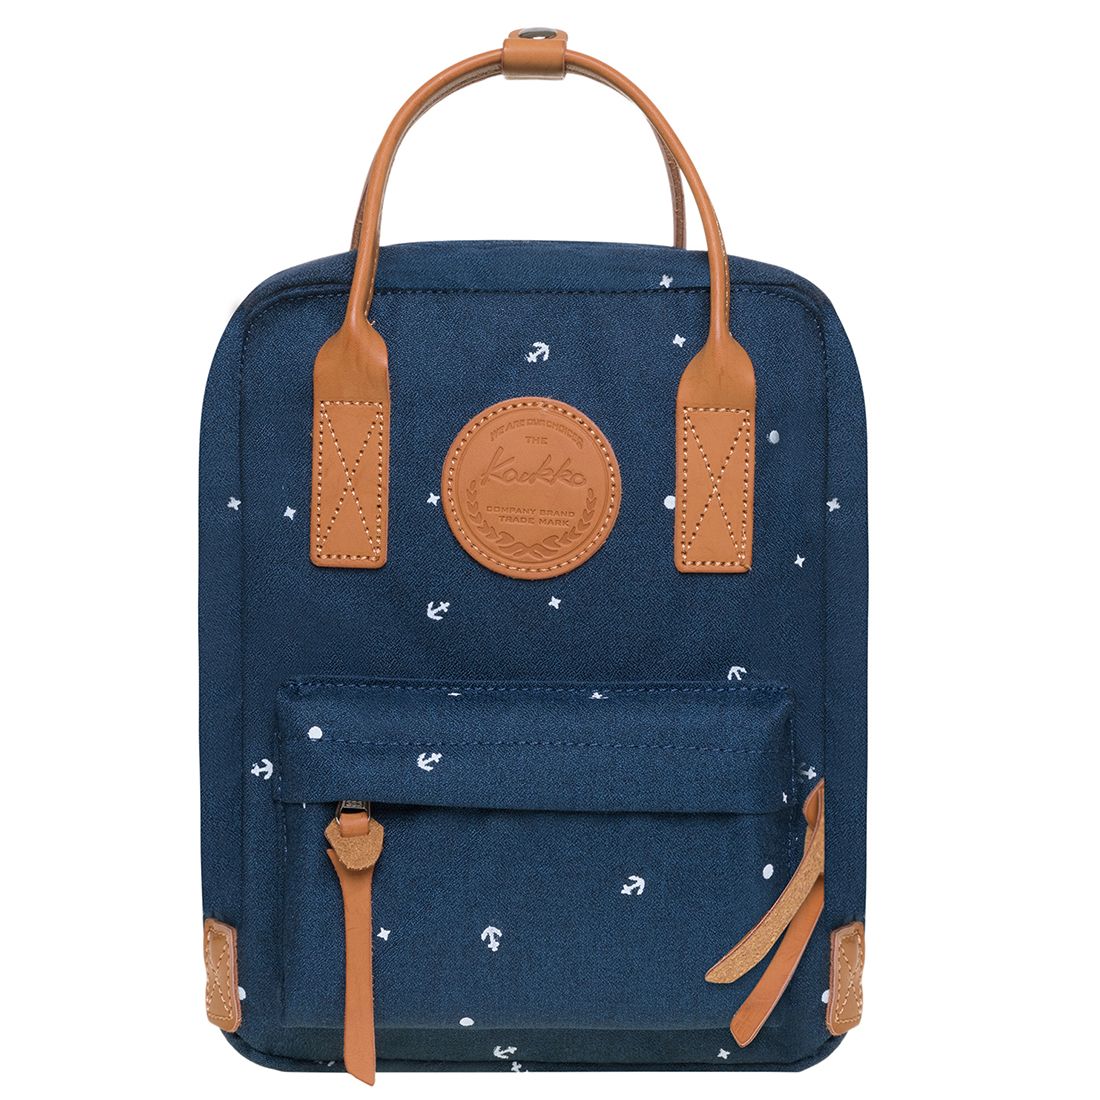 Small Navy Blue Leather Backpack for women - Stylish Leather Bag